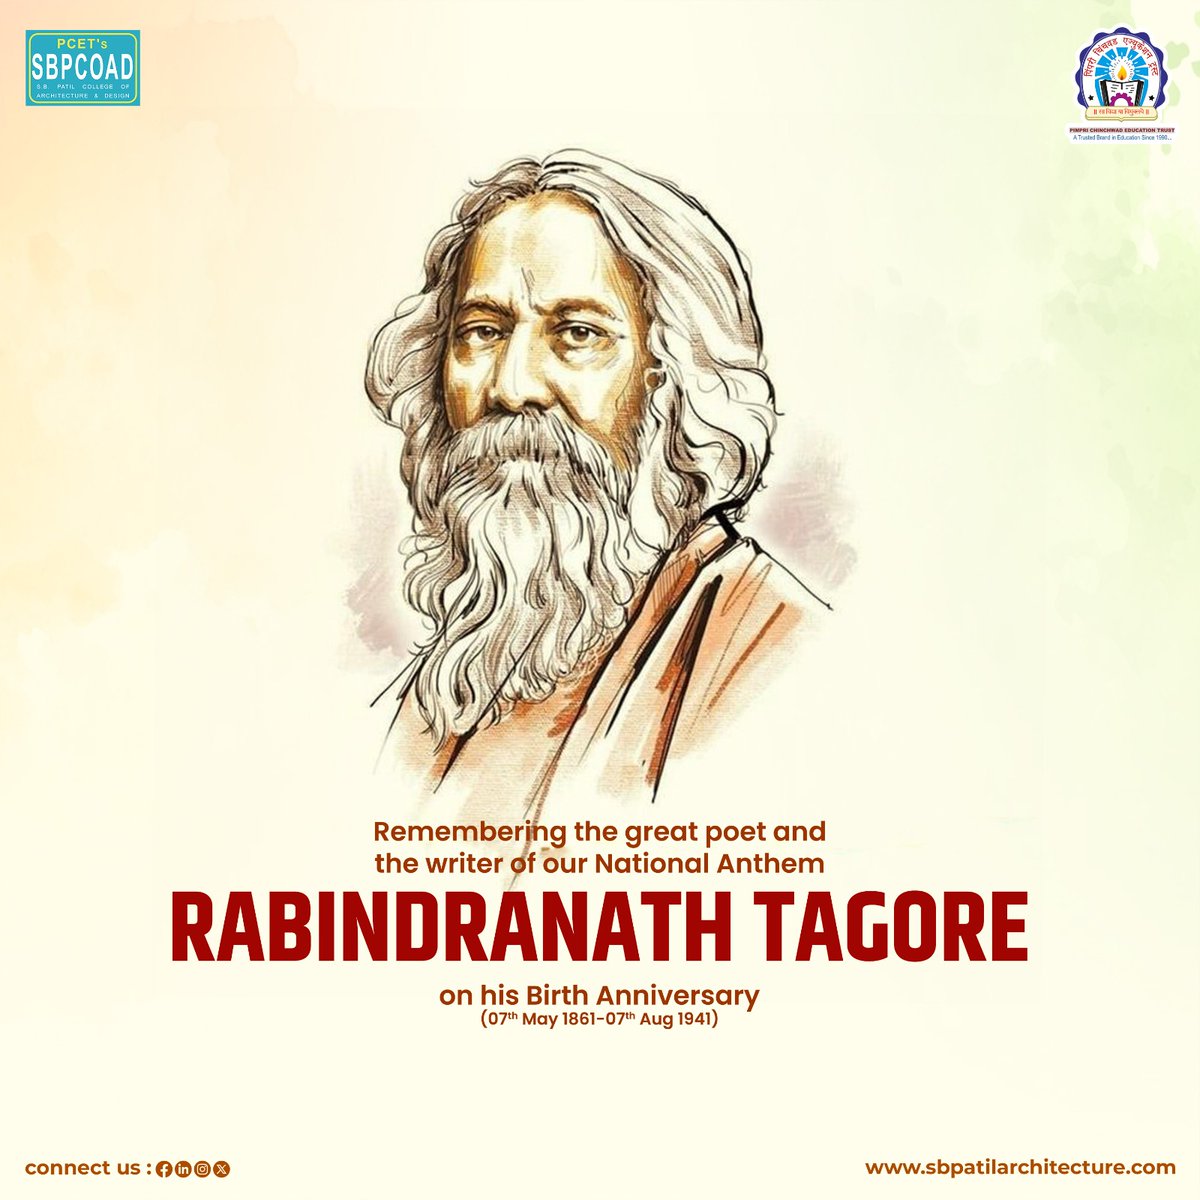 On this Rabindranath Tagore Jayanti,let us honor the memory of the visionary poet & philosopher whose words continue to resonate with essence of India's cultural heritage. #PCET #SBPCOAD #RabindranathTagore #TagoreJayanti #रवींद्रनाथटागोर #रवींद्रनाथटागोरजयंती #महानकवी #Poetry